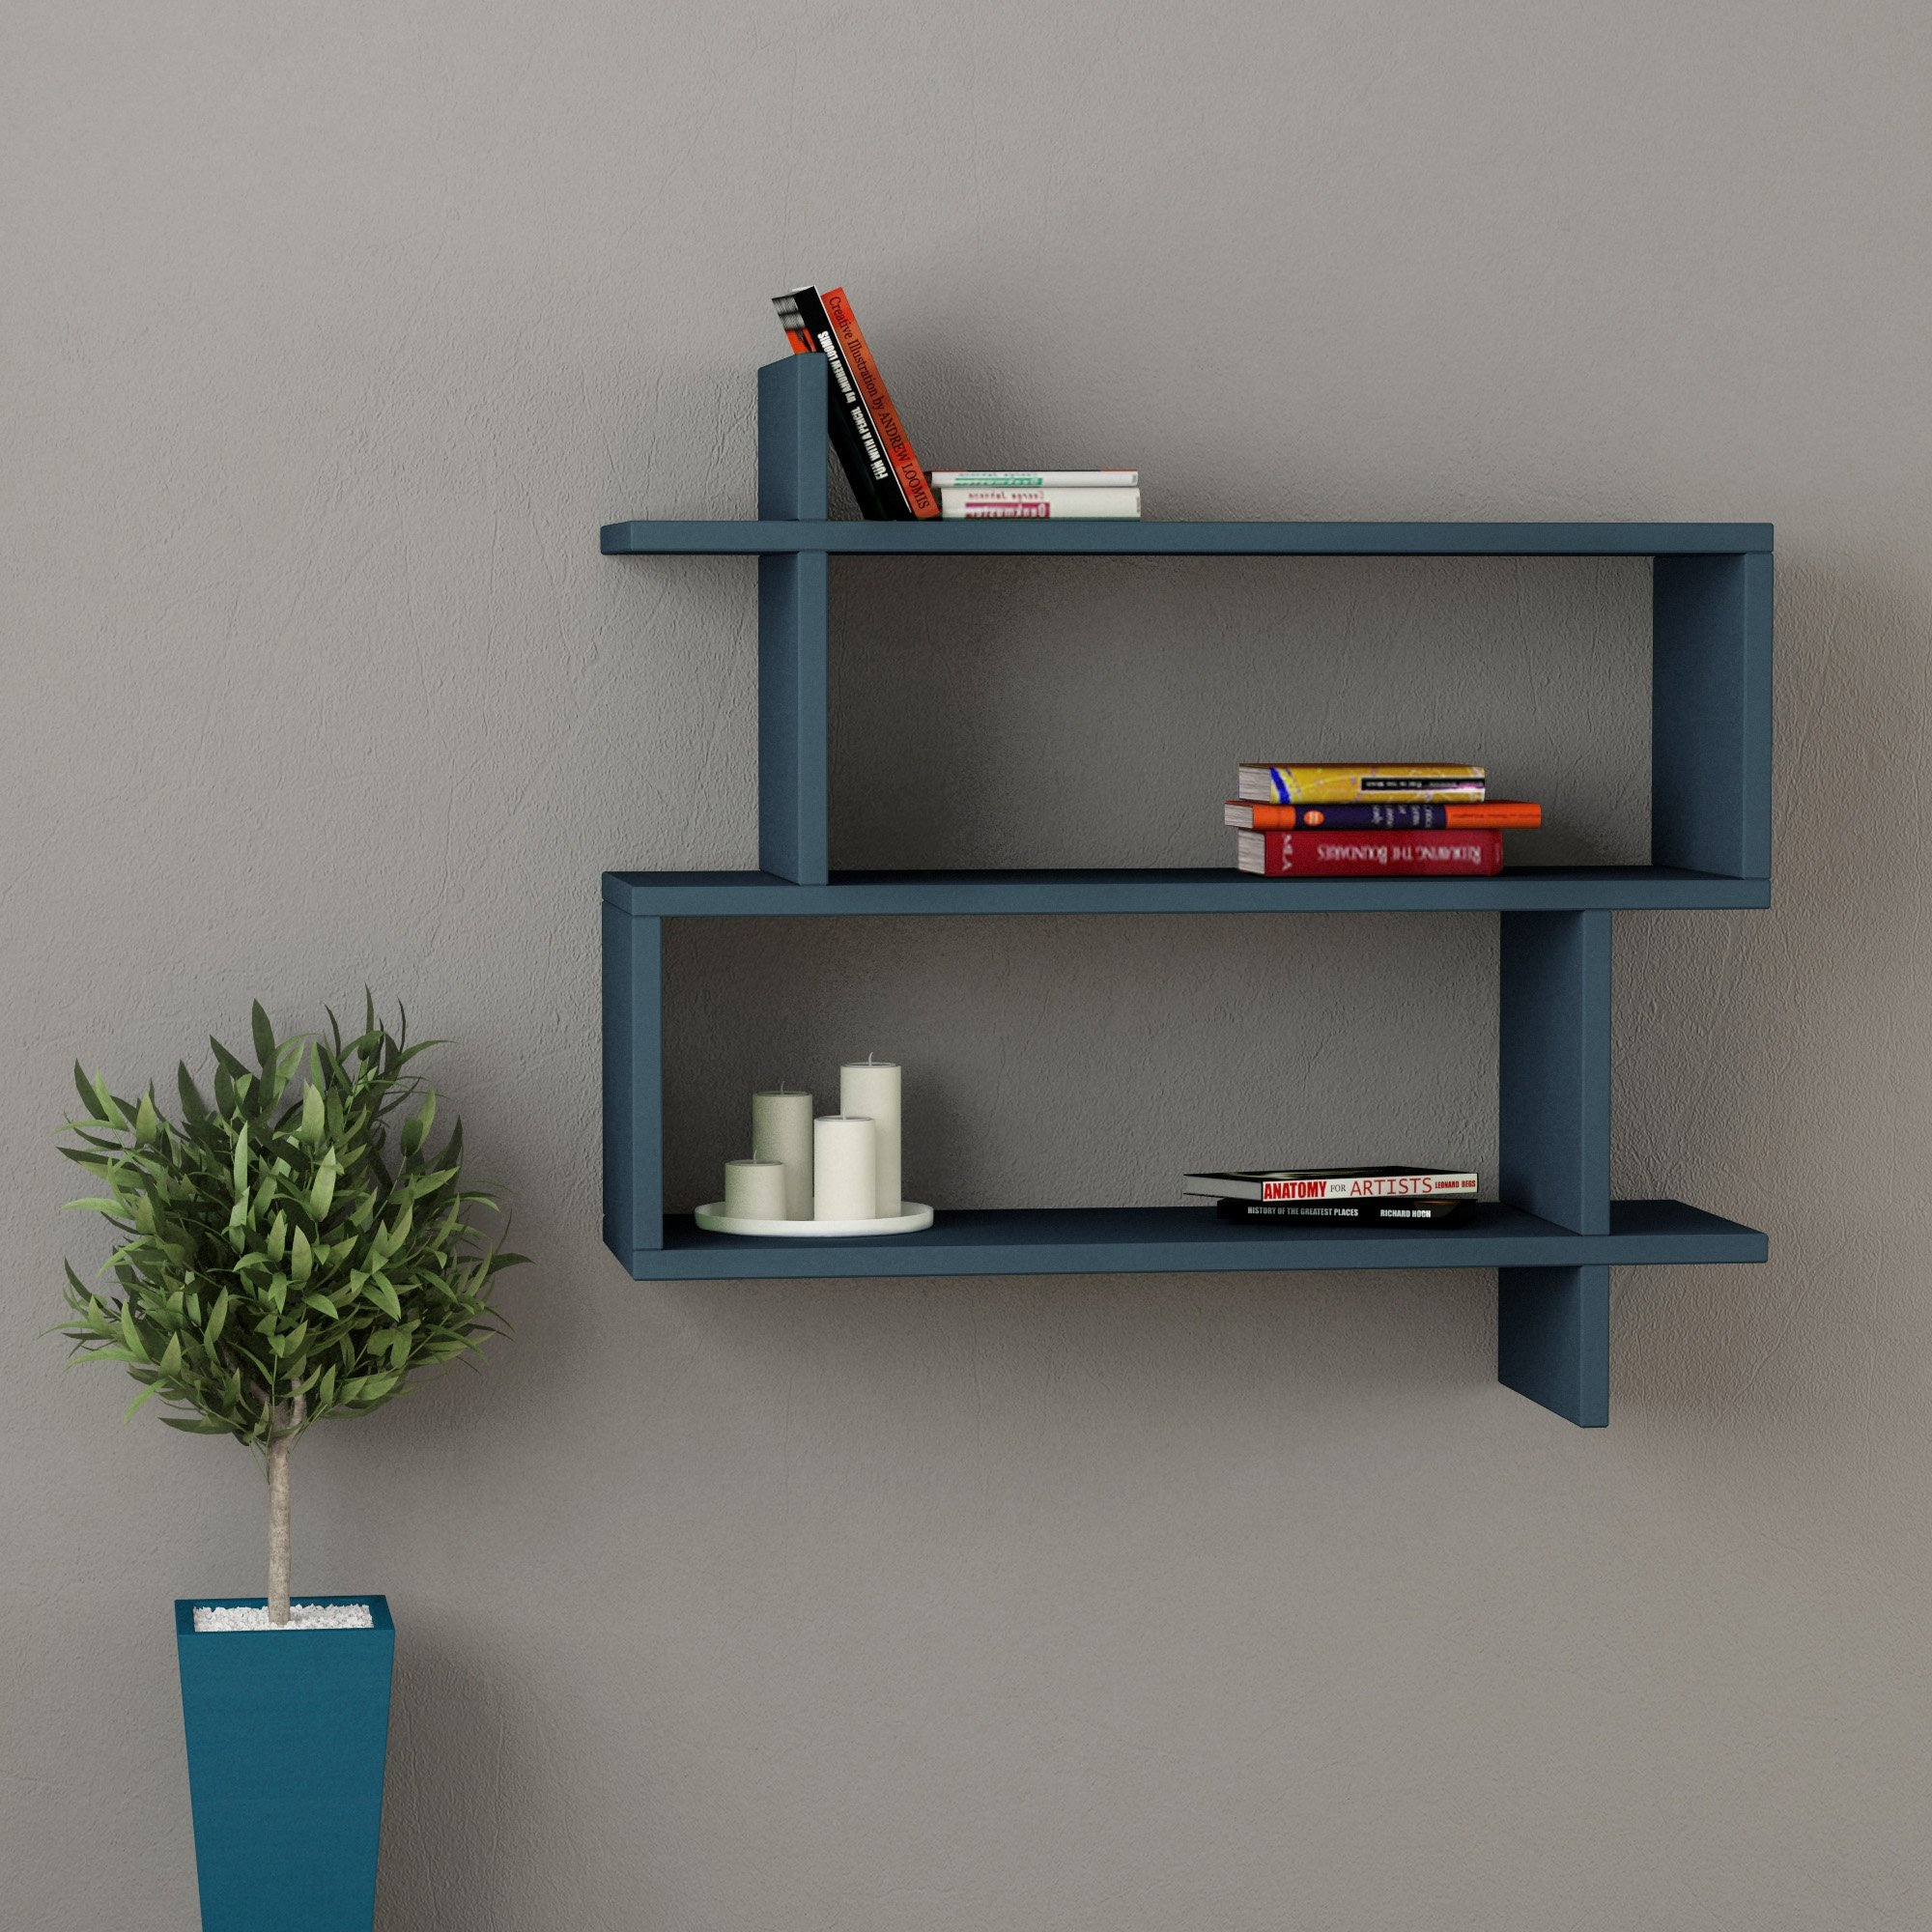 PARALEL BOOKCASE - TURQUOISE - M.KT.01.11055.10